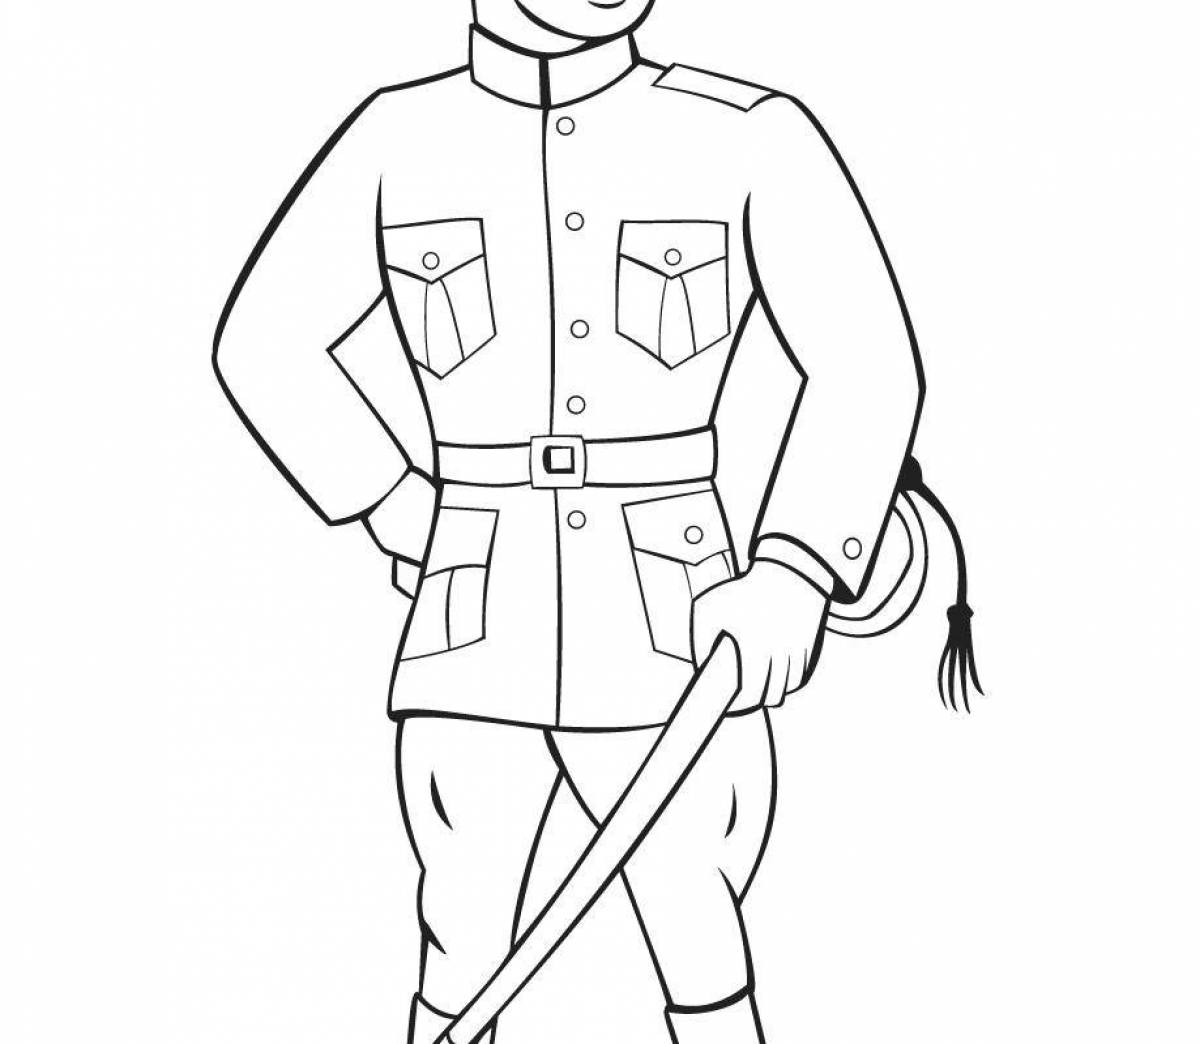 Shiny soldier at the post drawing